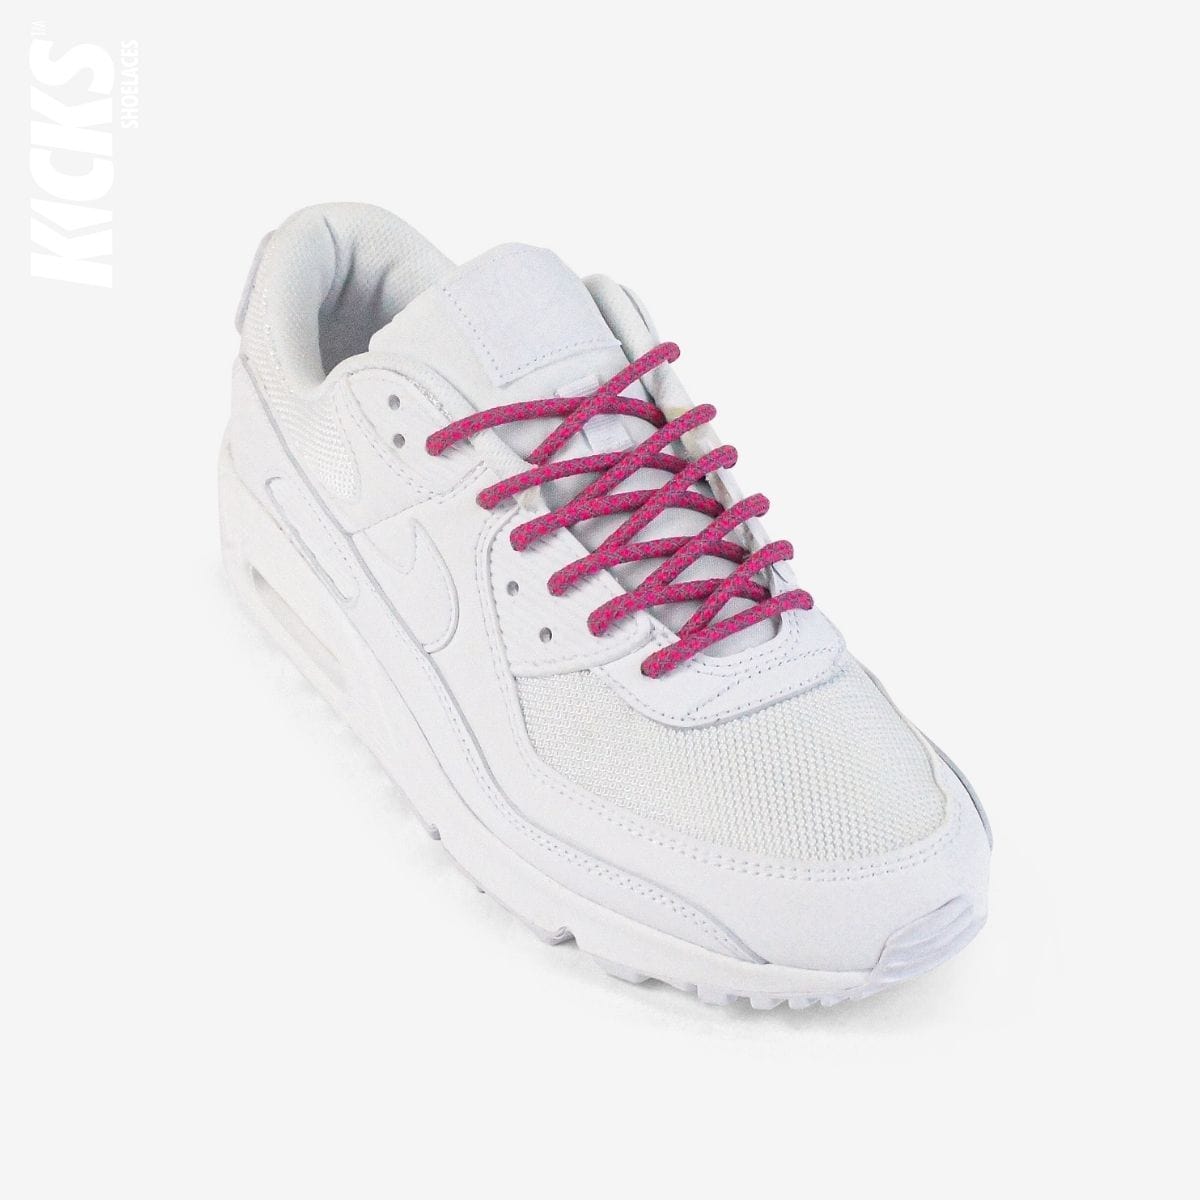 rope-laces-on-white-sneakers-with-kids-rose-pink-shoelaces